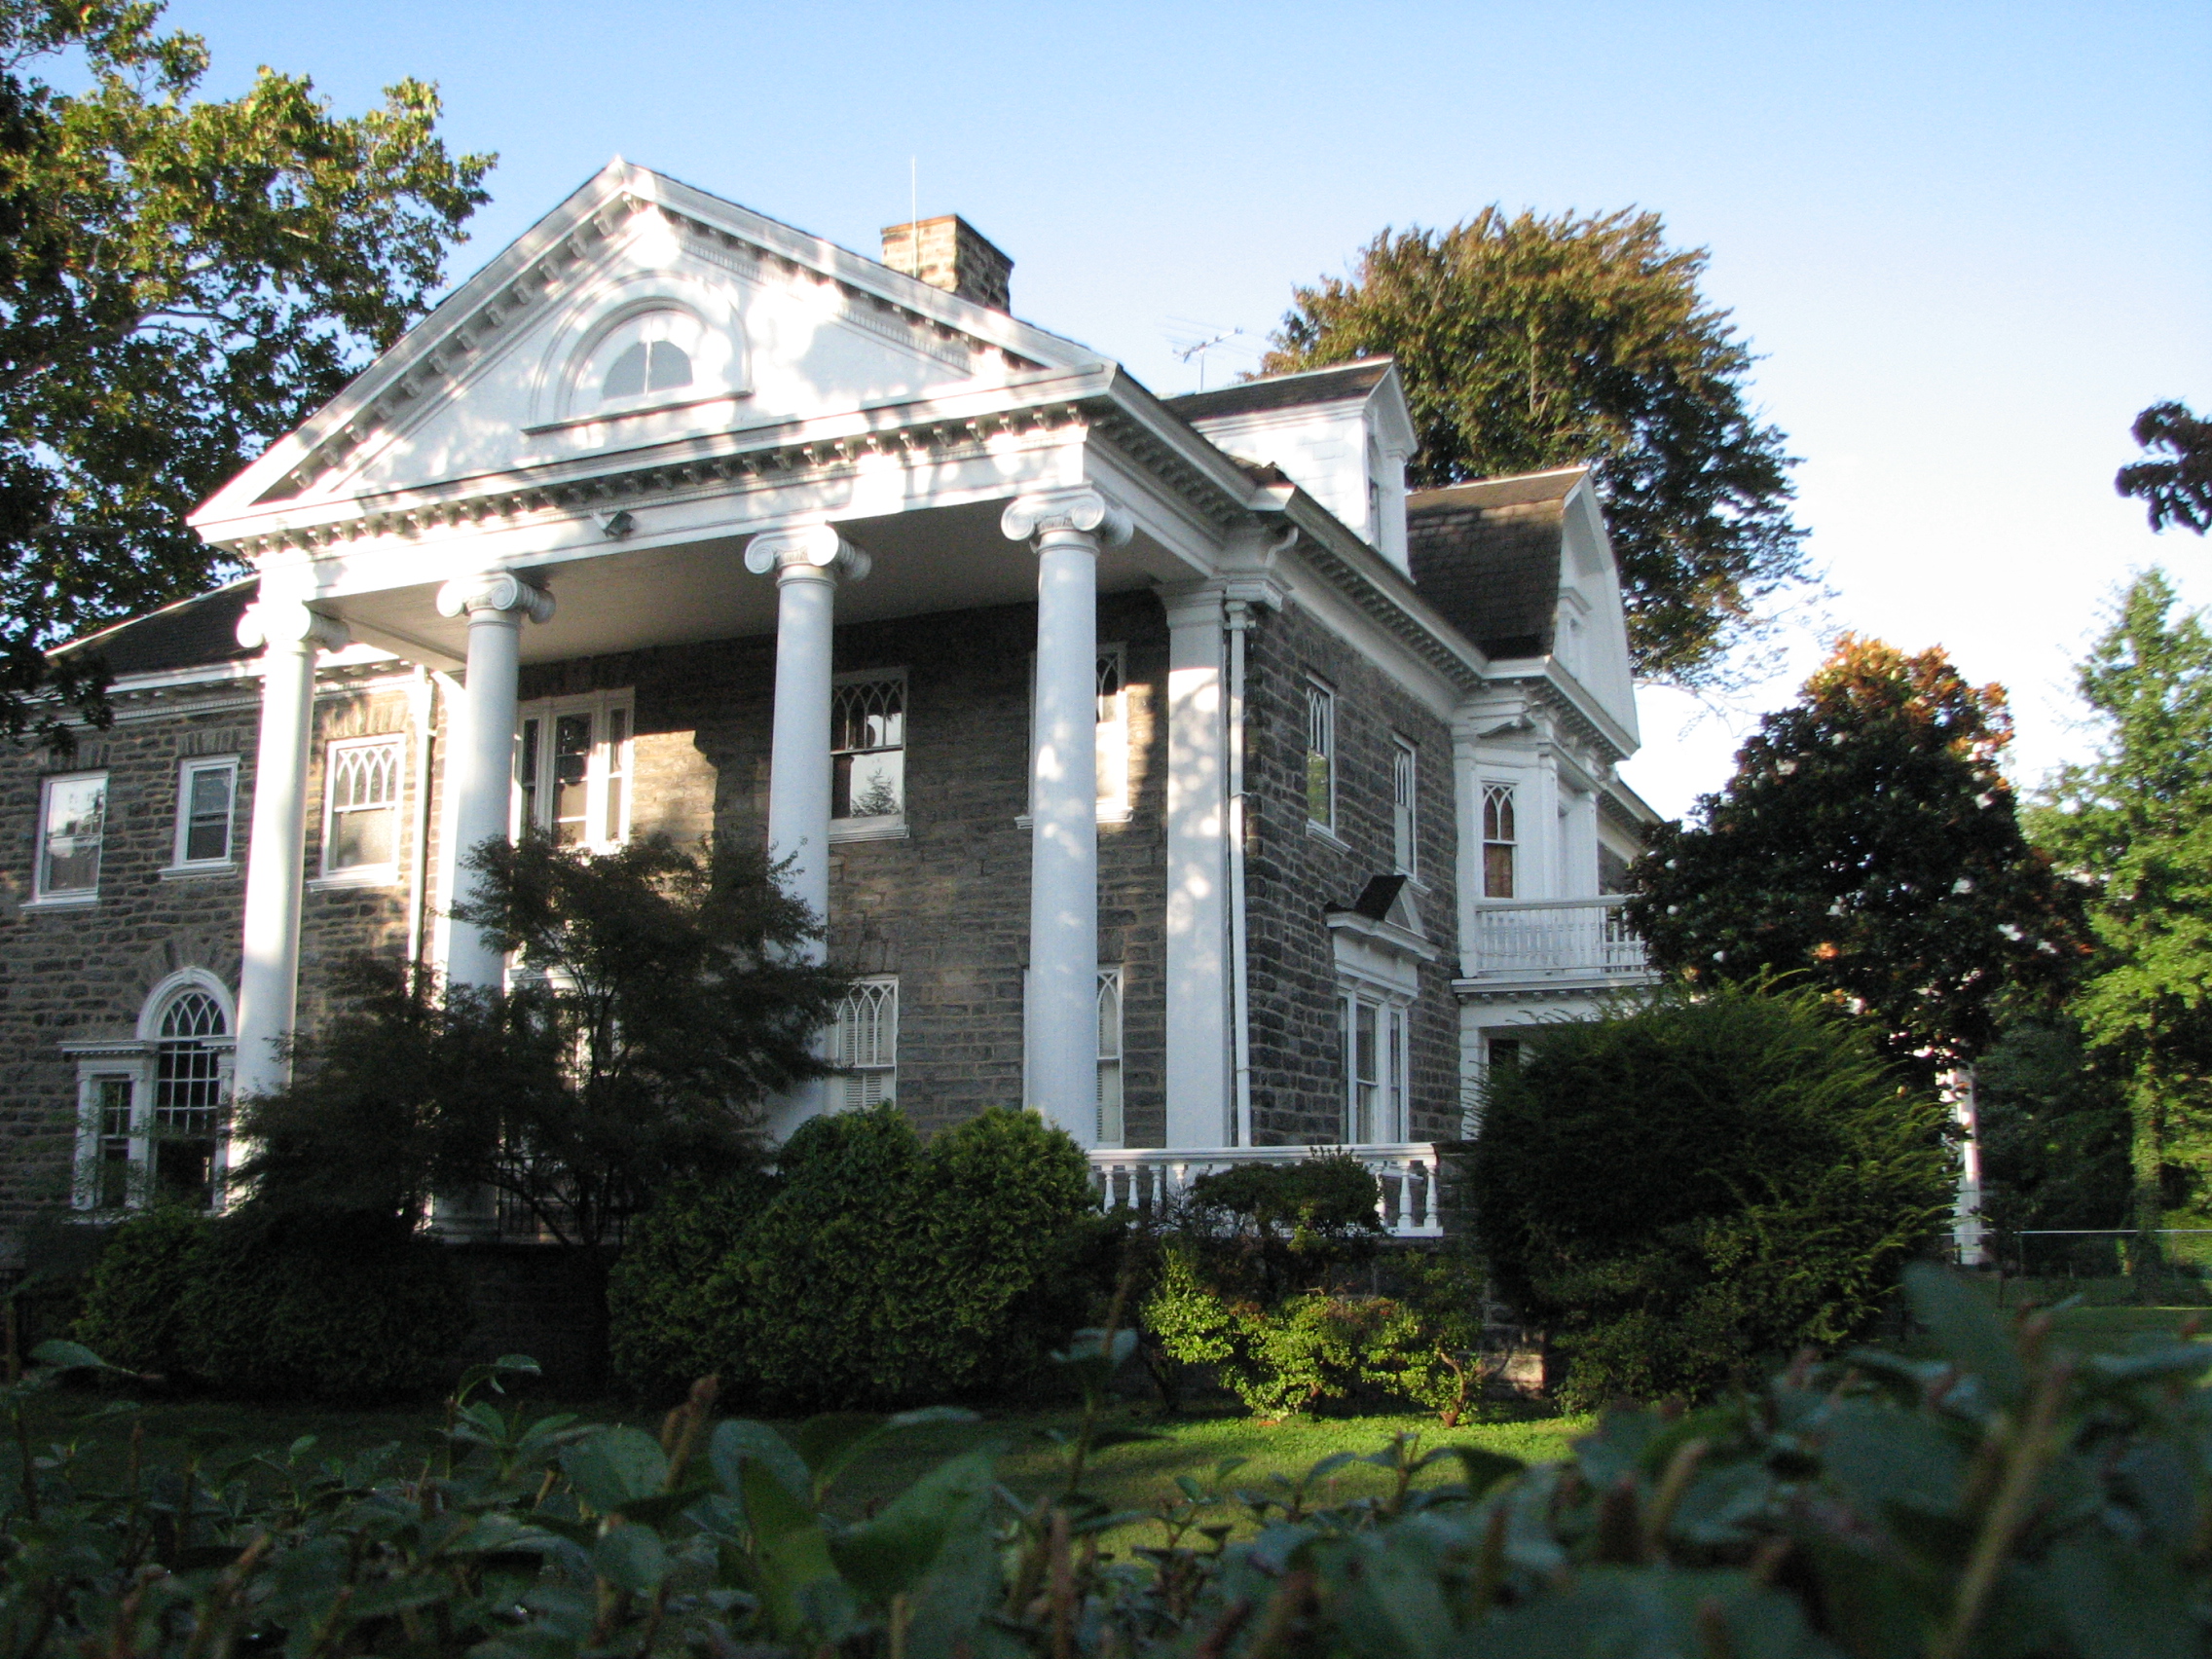 Thomas Lonsdale designed this Colonial-style house with Classical features on the 5800 block of Drexel Road.